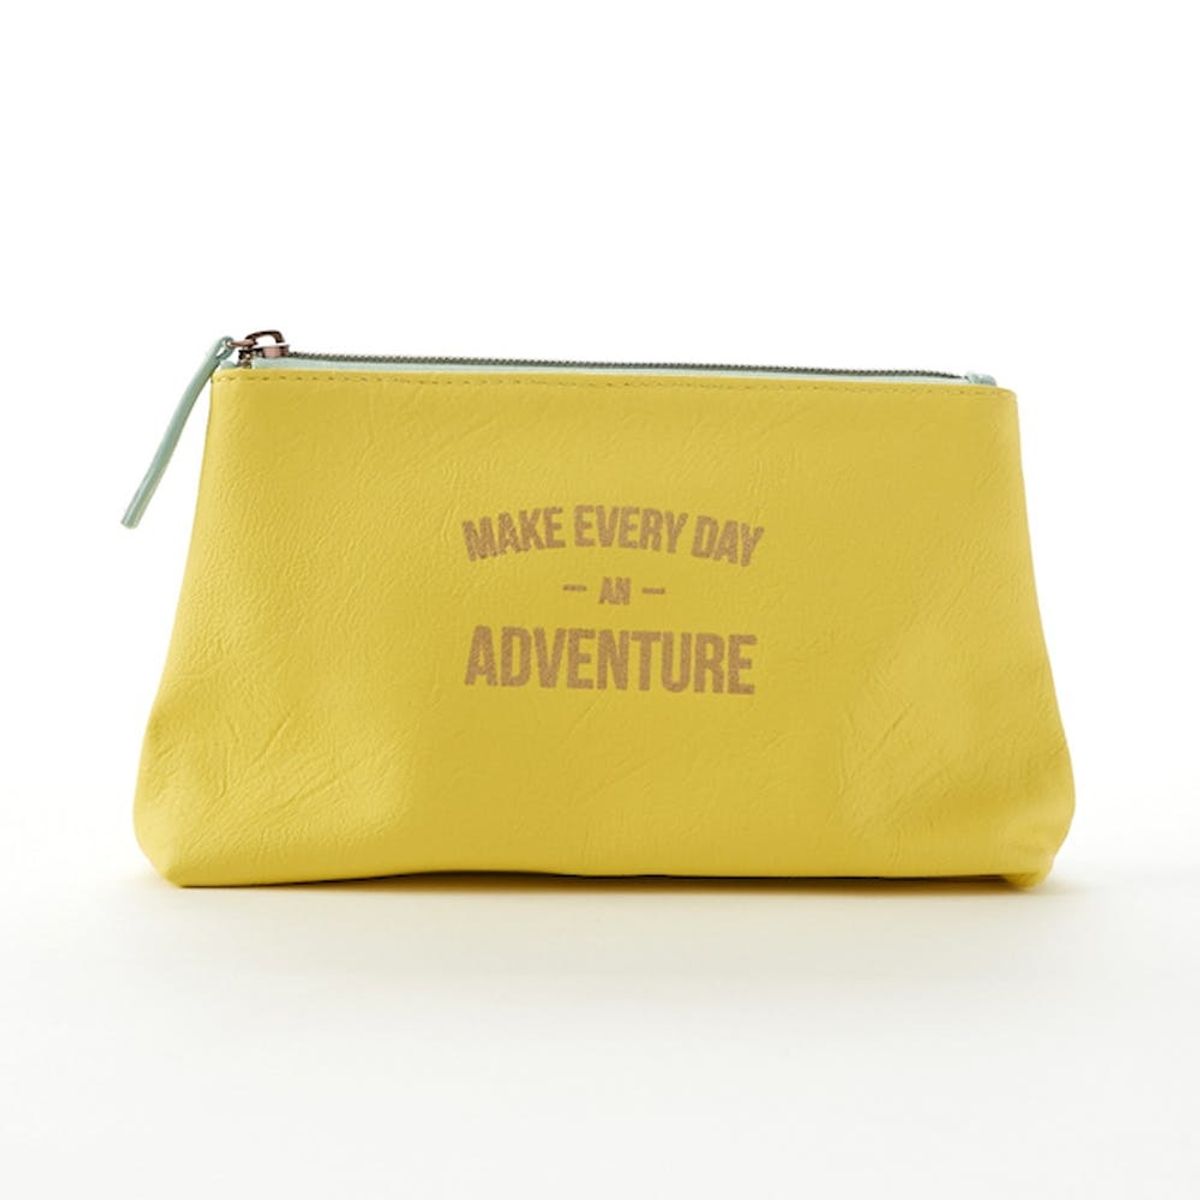 23 Awesome Gifts for the Camper in Your Life